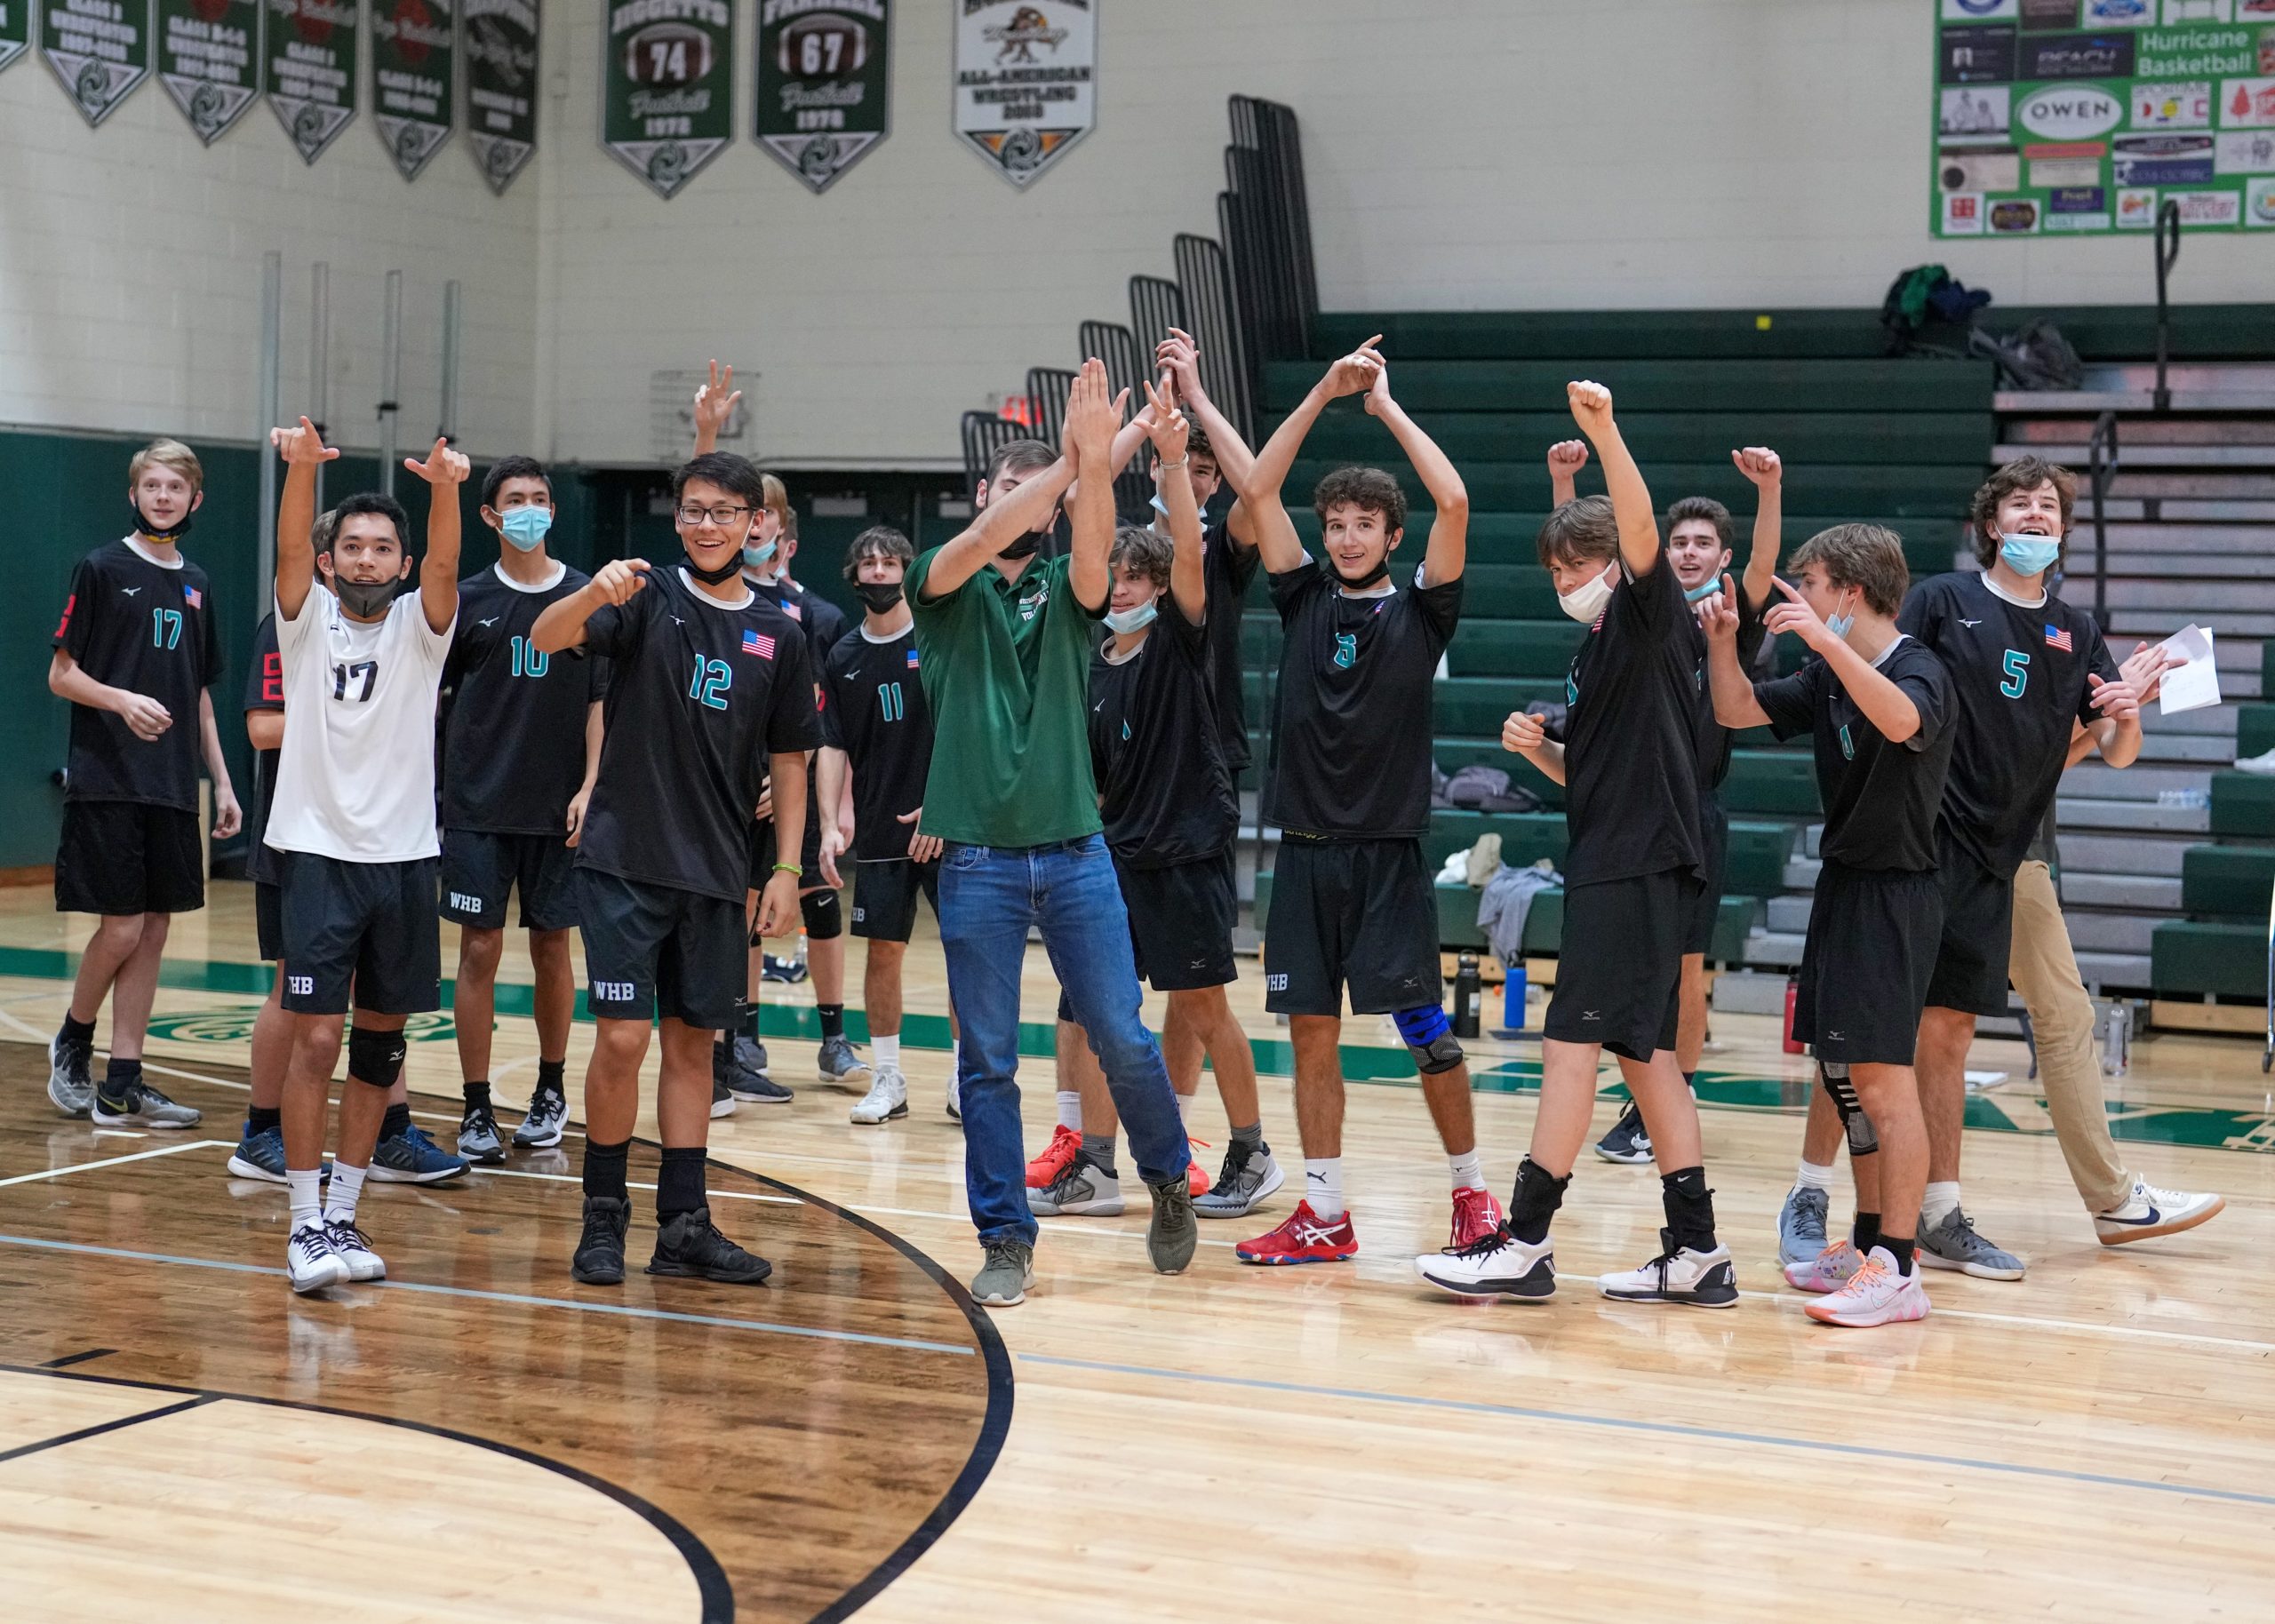 The Westhampton Beach boys volleyball team thanks its fans following a 3-0 sweep of Hauppauge in the Suffolk County Division II semifinals. RON ESPOSITO